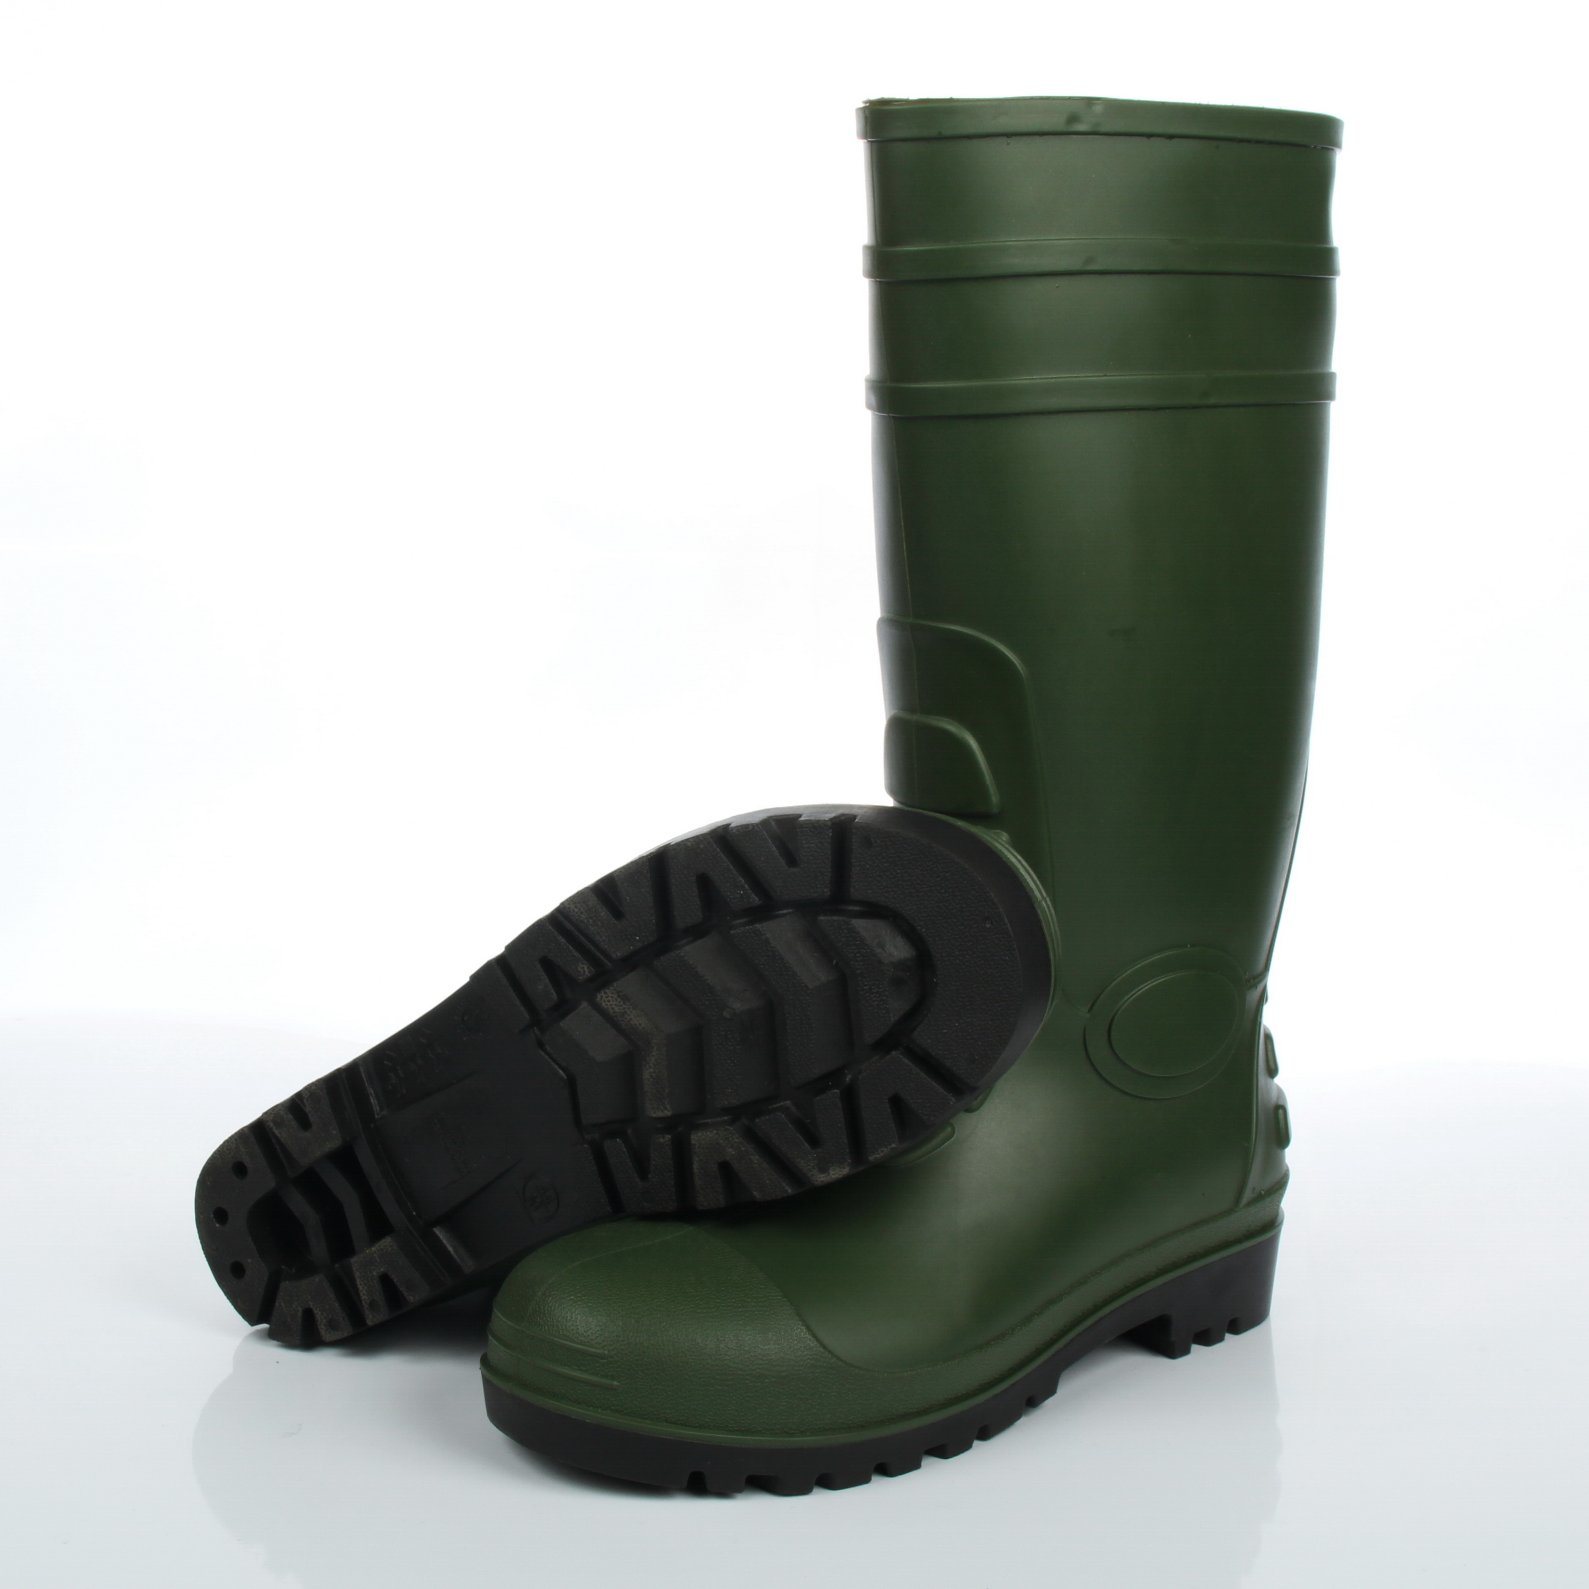 Man Safety Boot, PVC Safety Boot, Safety Man Rain Boot, Safety Boot